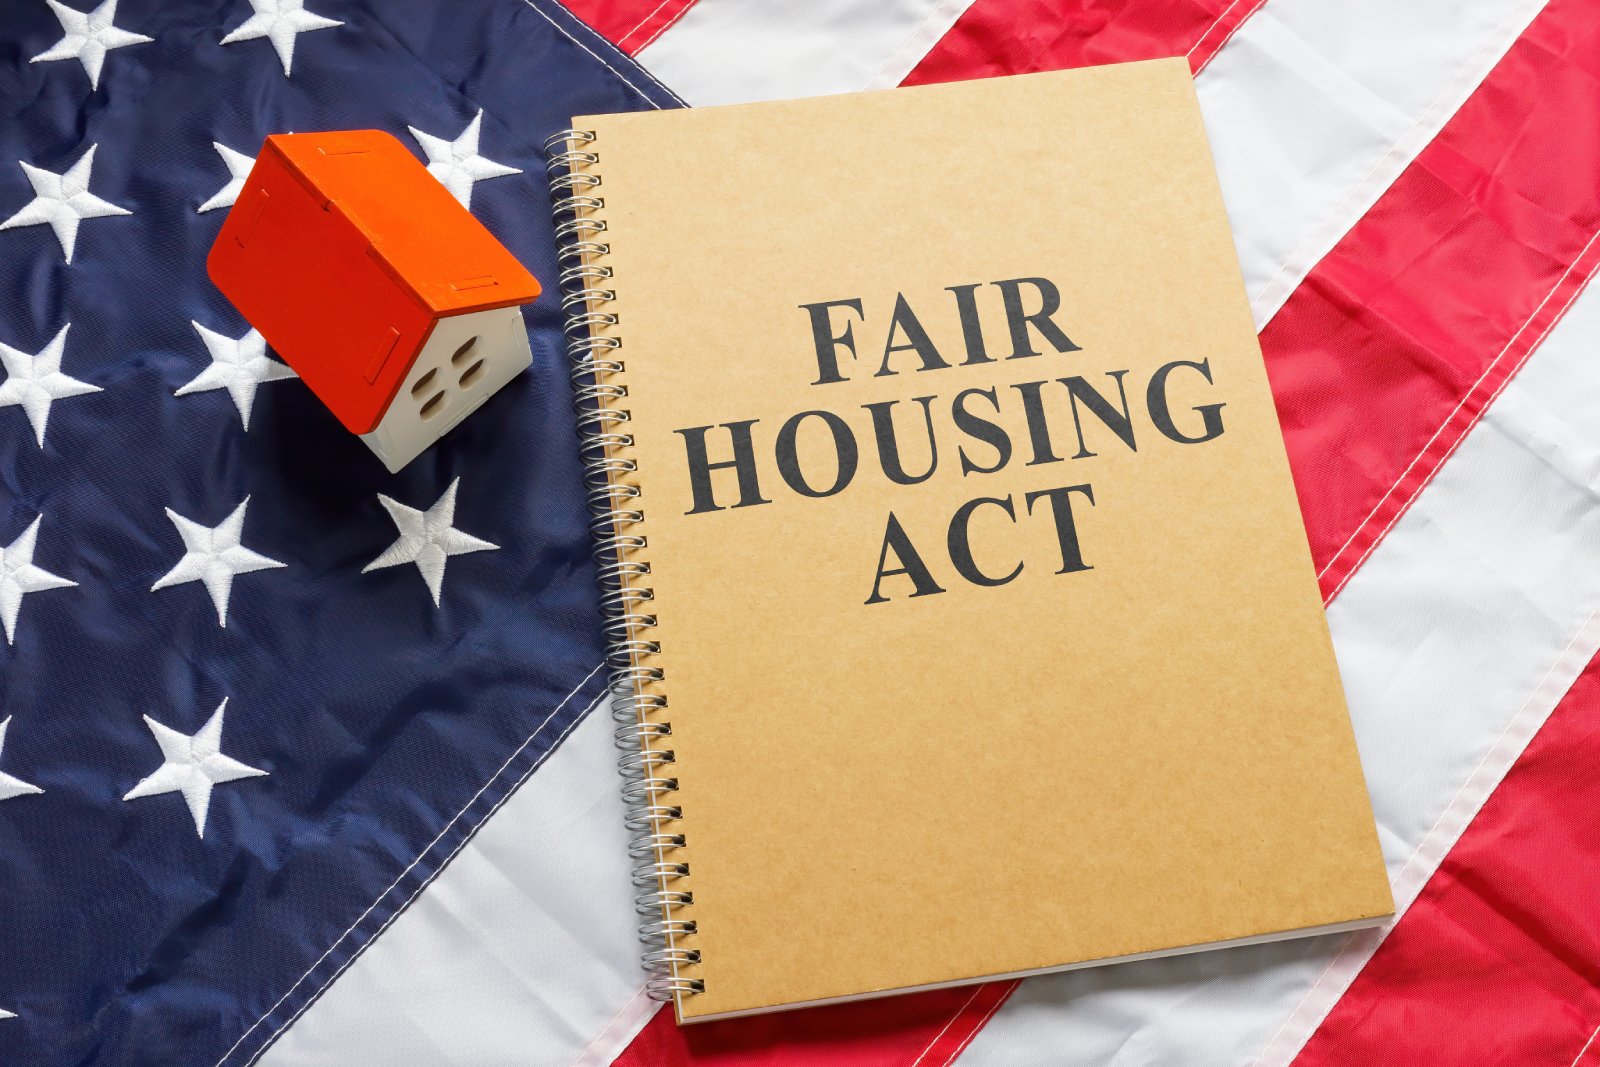 Image Credit: Shutterstock / Vitalii Vodolazskyi <p><span>The Trump administration proposed changes to the Fair Housing Act, making it harder for LGBTQ+ individuals to fight discrimination in renting or buying homes.</span></p>